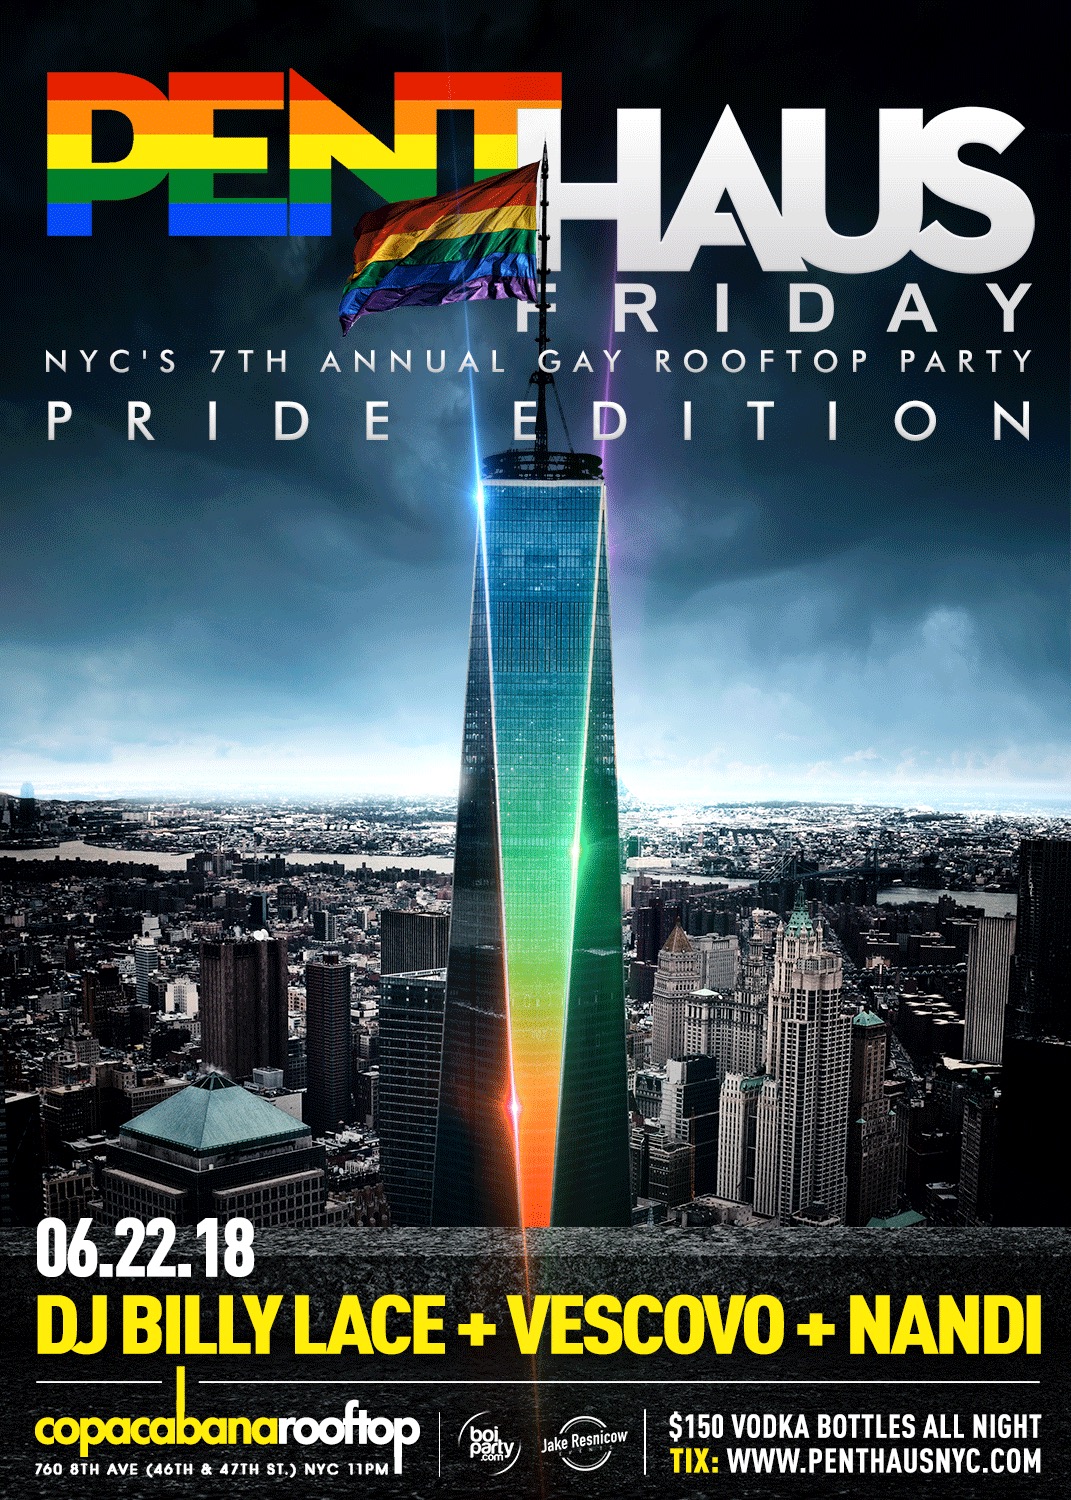 Penthaus, gay pride, nyc pride, gay party, chrisryannyc, boiparty, jake resnicow, gay dance party, nyc gay nightlife, lgbtq party